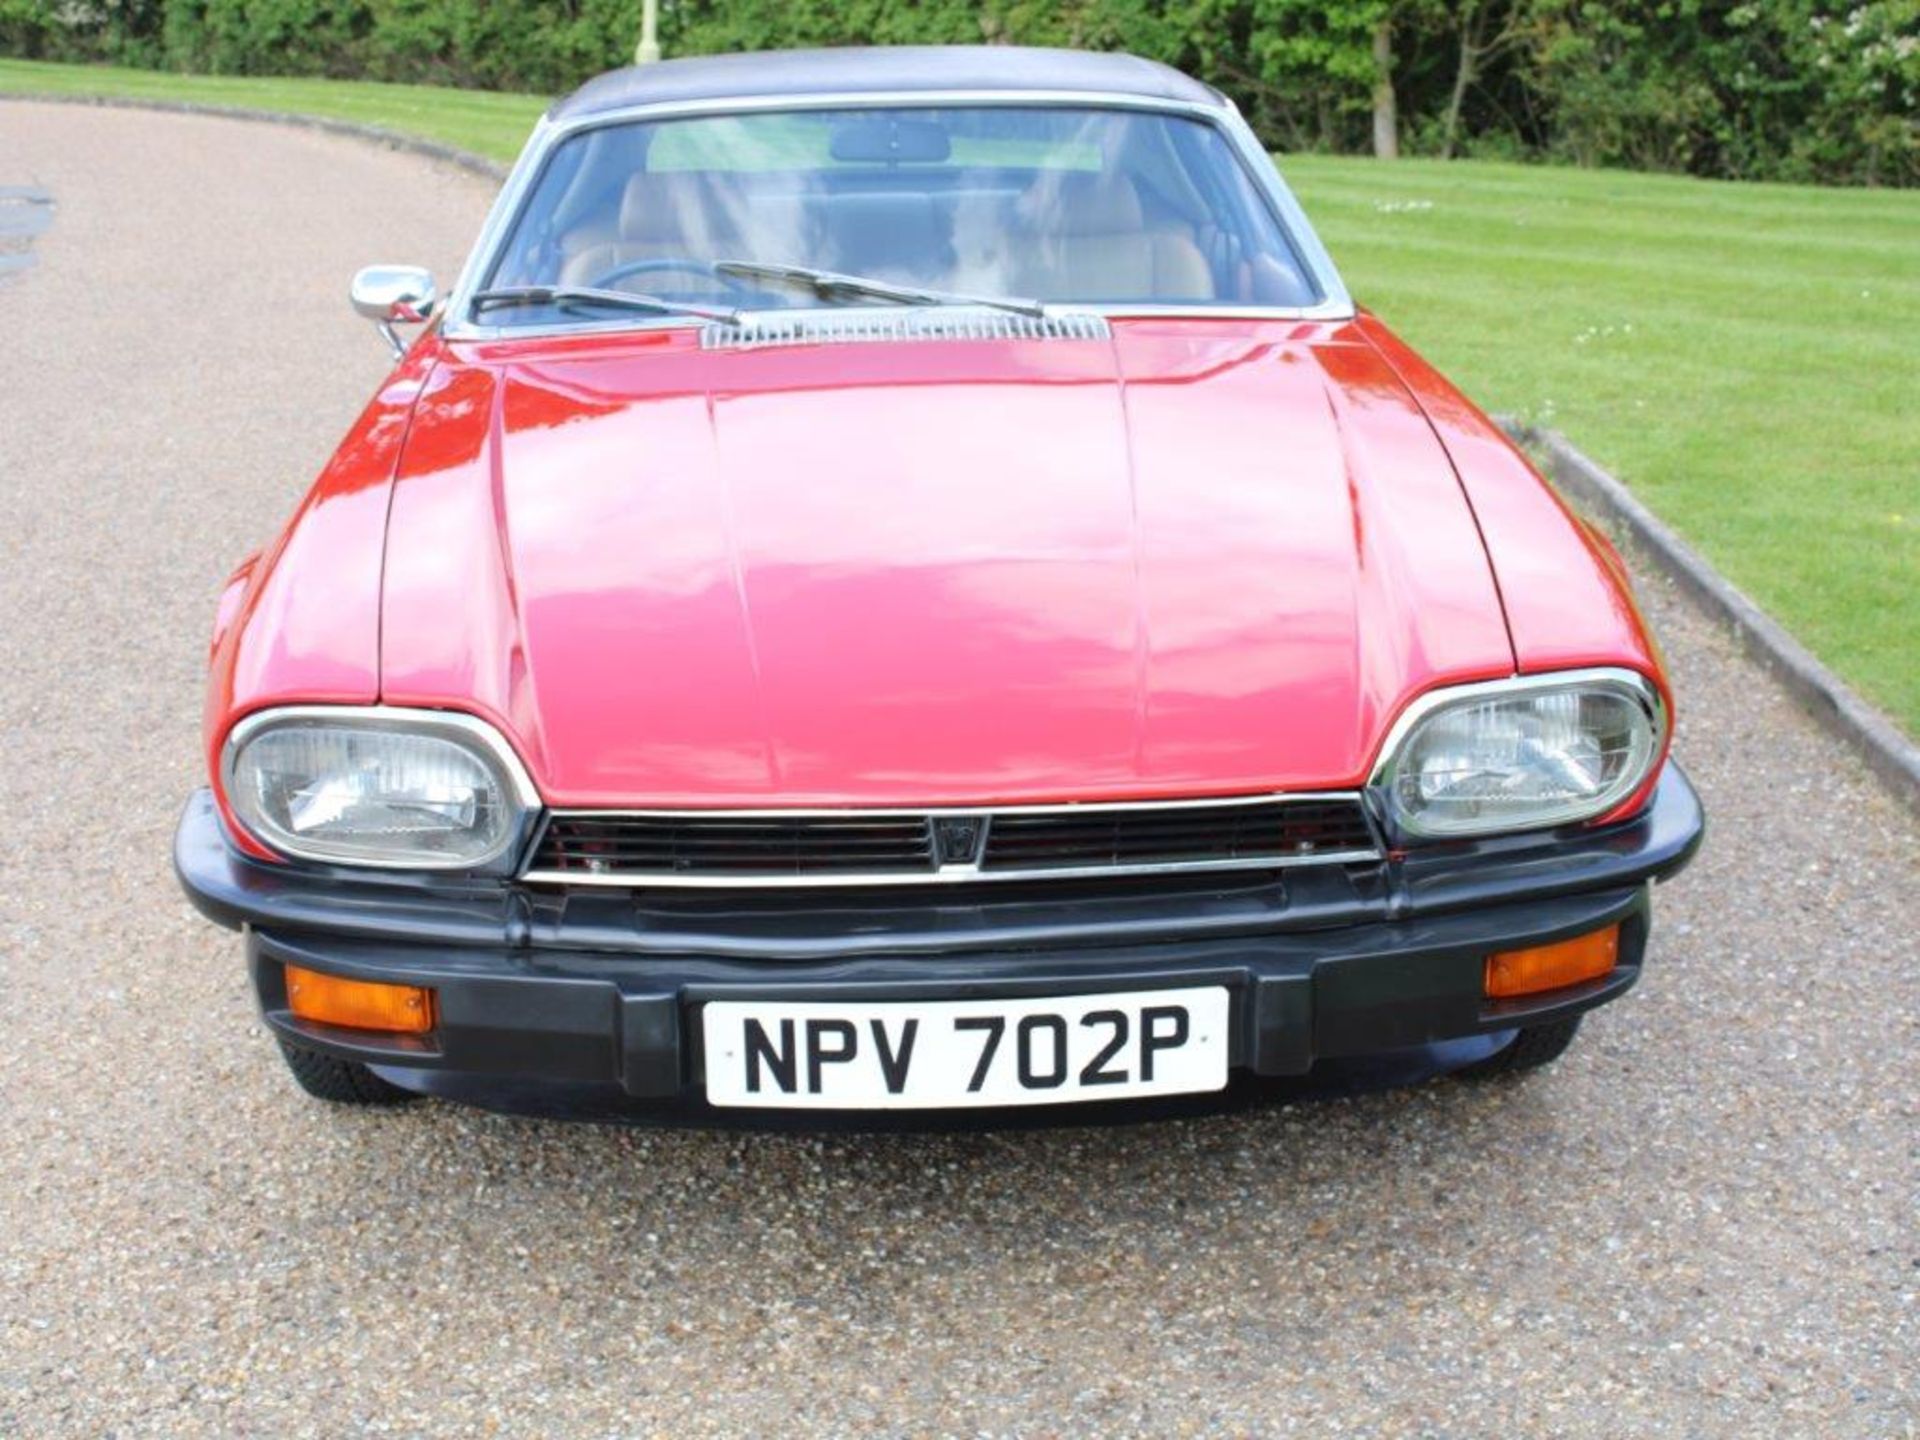 1976 Jaguar XJ-S 5.3 V12 Coupe Auto 29,030 miles from new - Image 6 of 28